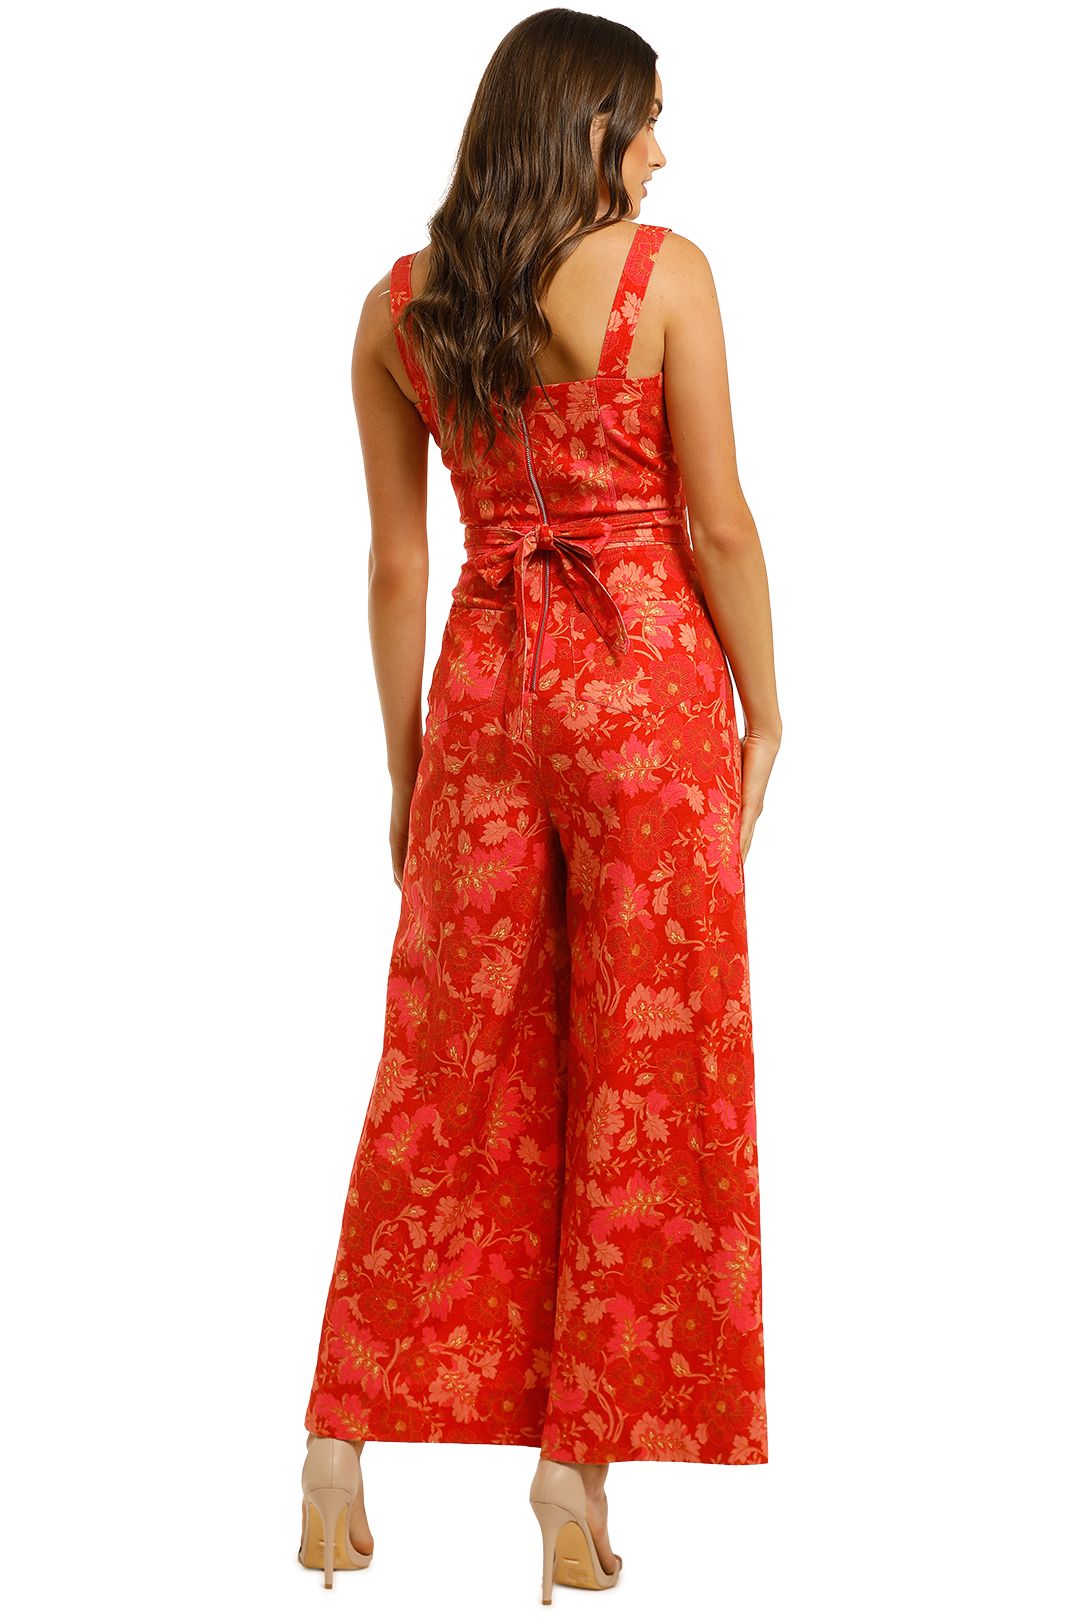 Ministry-of-Style-Hibiscus-Jumpsuit-Print-Back